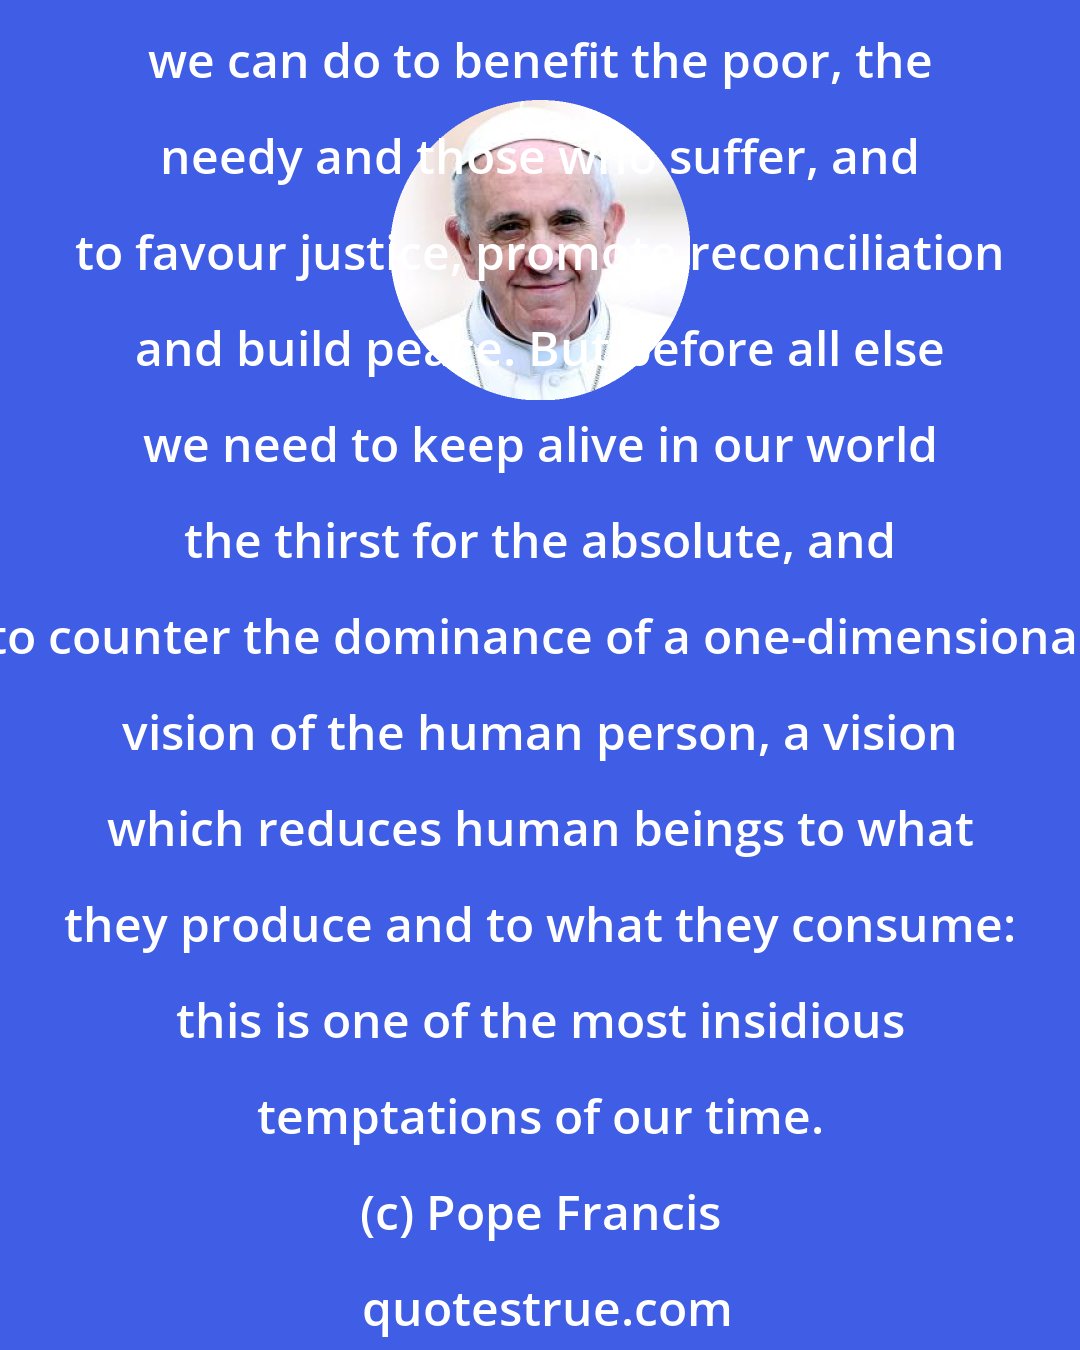 Pope Francis: The Church is likewise conscious of the responsibility which all of us have for our world, for the whole of creation, which we must love and protect. There is much that we can do to benefit the poor, the needy and those who suffer, and to favour justice, promote reconciliation and build peace. But before all else we need to keep alive in our world the thirst for the absolute, and to counter the dominance of a one-dimensional vision of the human person, a vision which reduces human beings to what they produce and to what they consume: this is one of the most insidious temptations of our time.